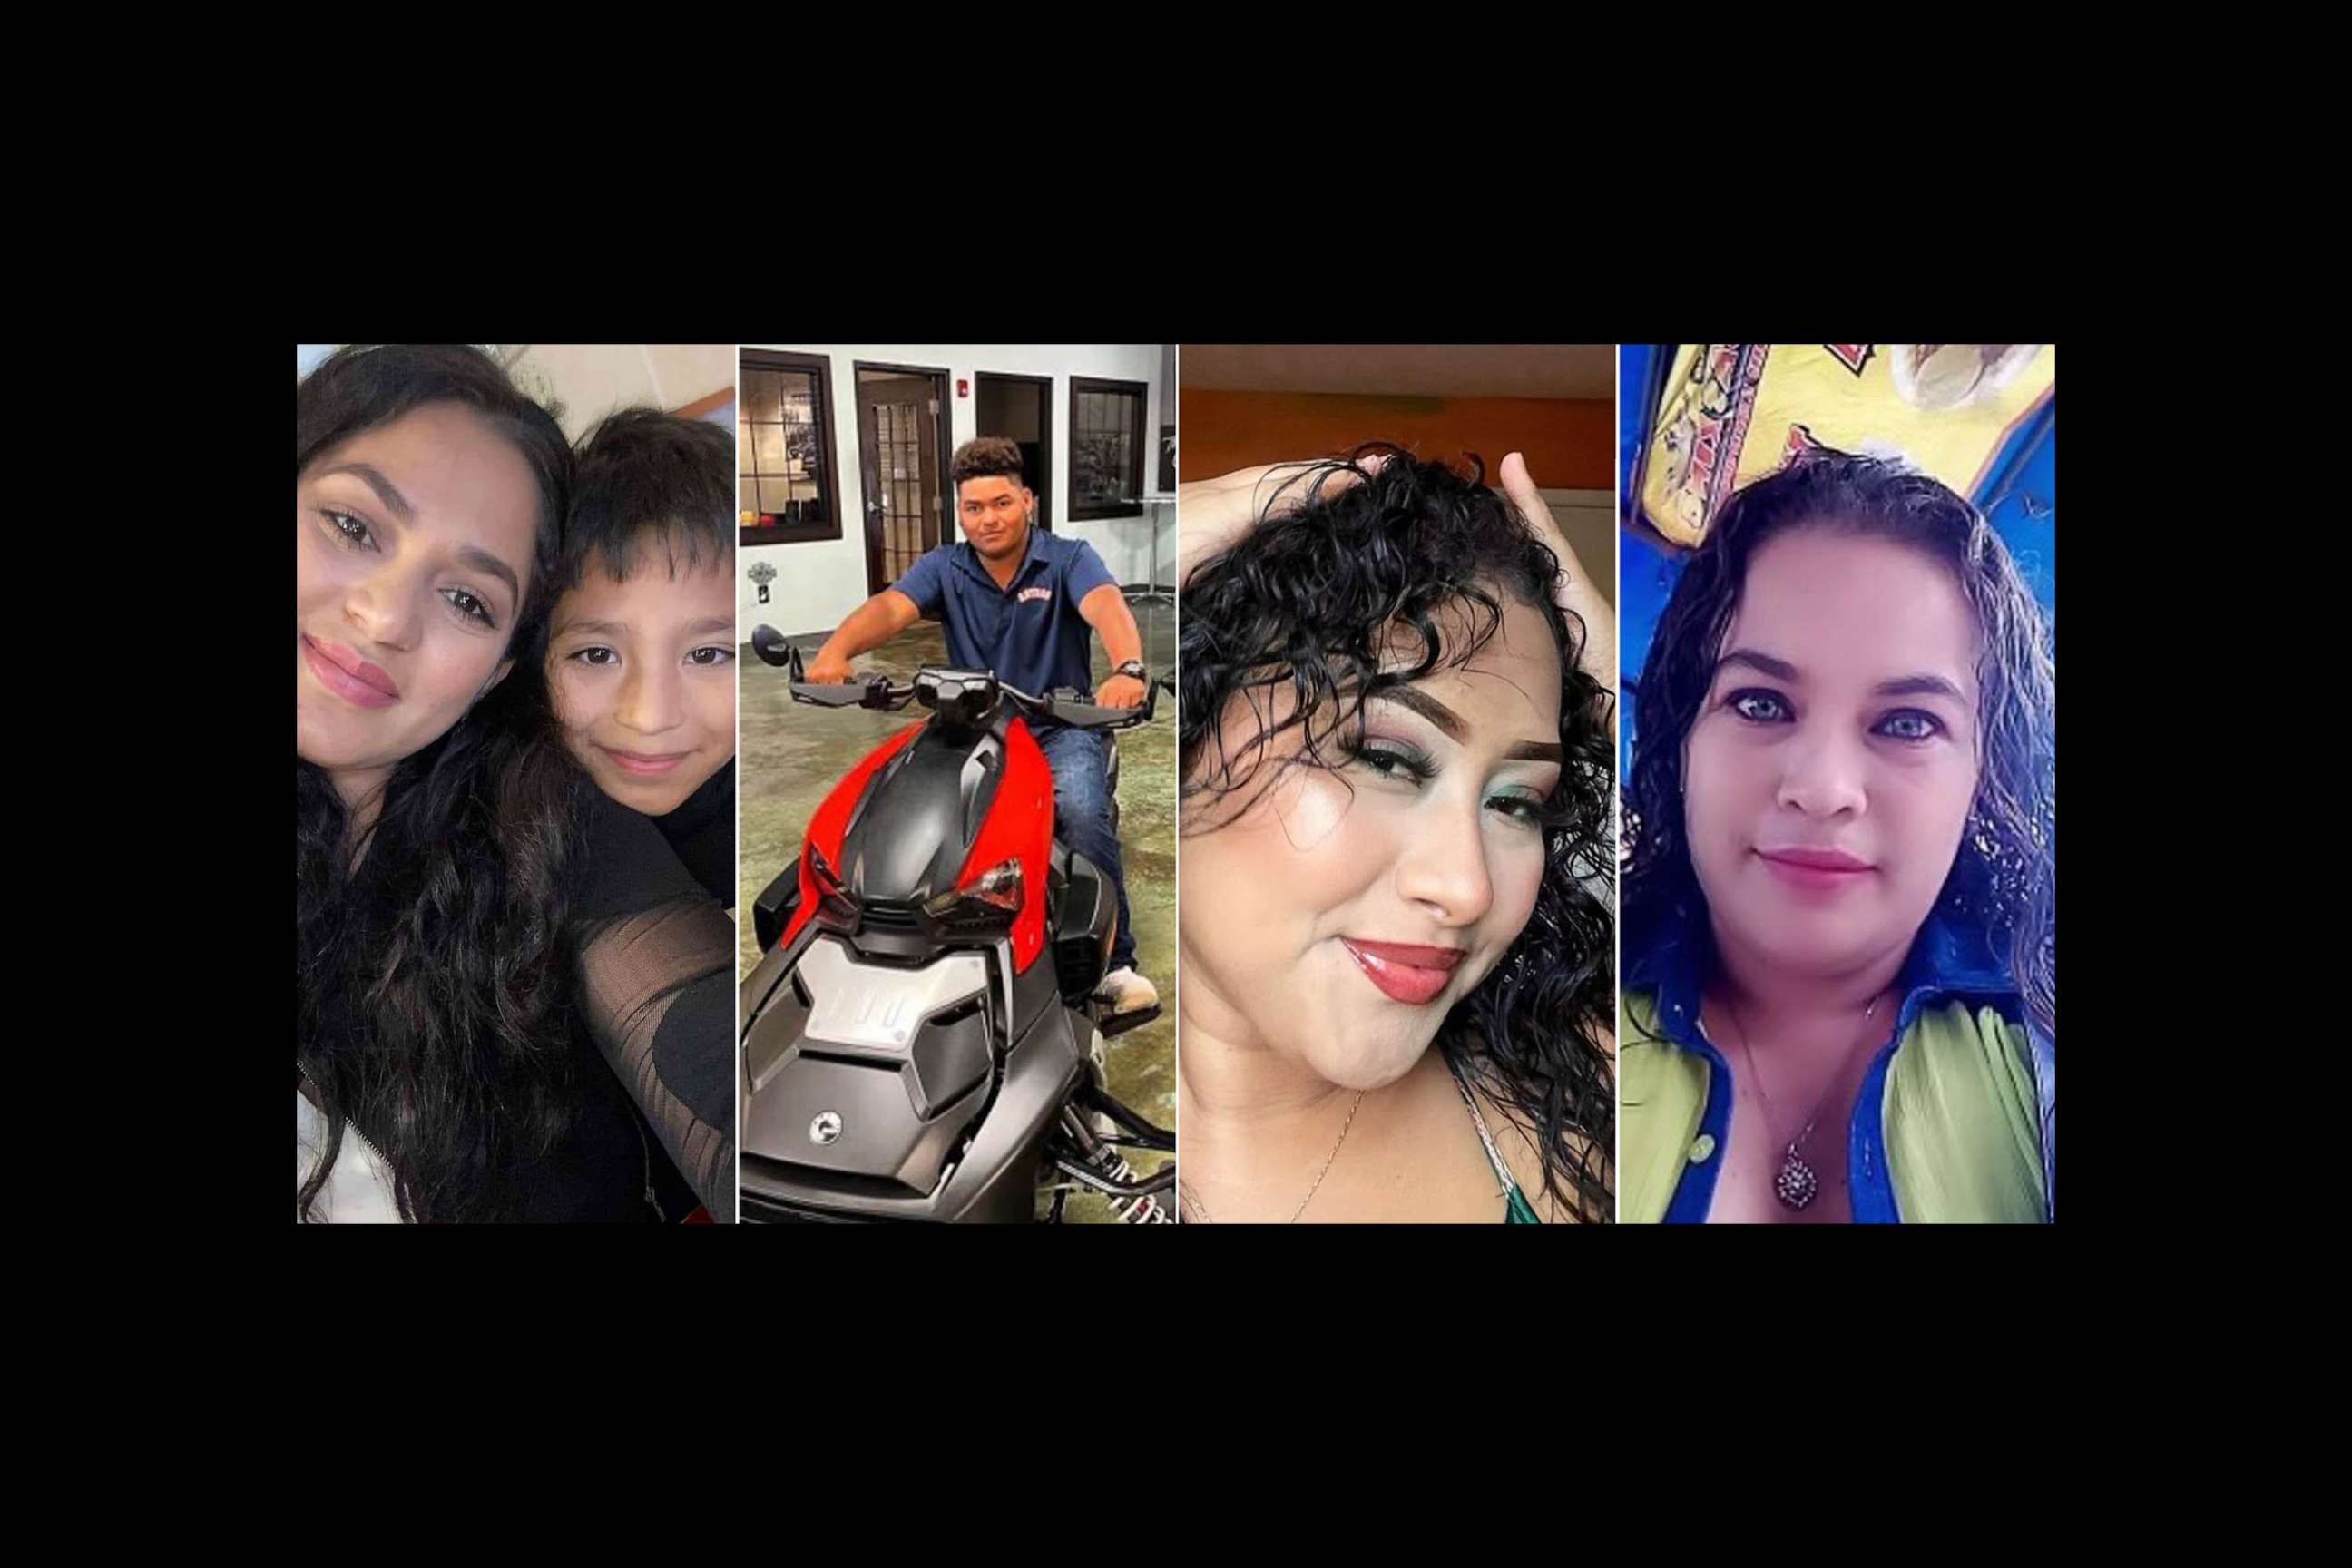 PHOTO: From left to right pictures of victim of mass shooting in Cleveland, Texas are seen in this split picture: Daniel Enrique Lazo Guzmán, Sonia Argentina Guzmán Taibot, Josué Jonatan Cáceres, Diana Velasquez Alvarado, and Obdulia Molina Rivera